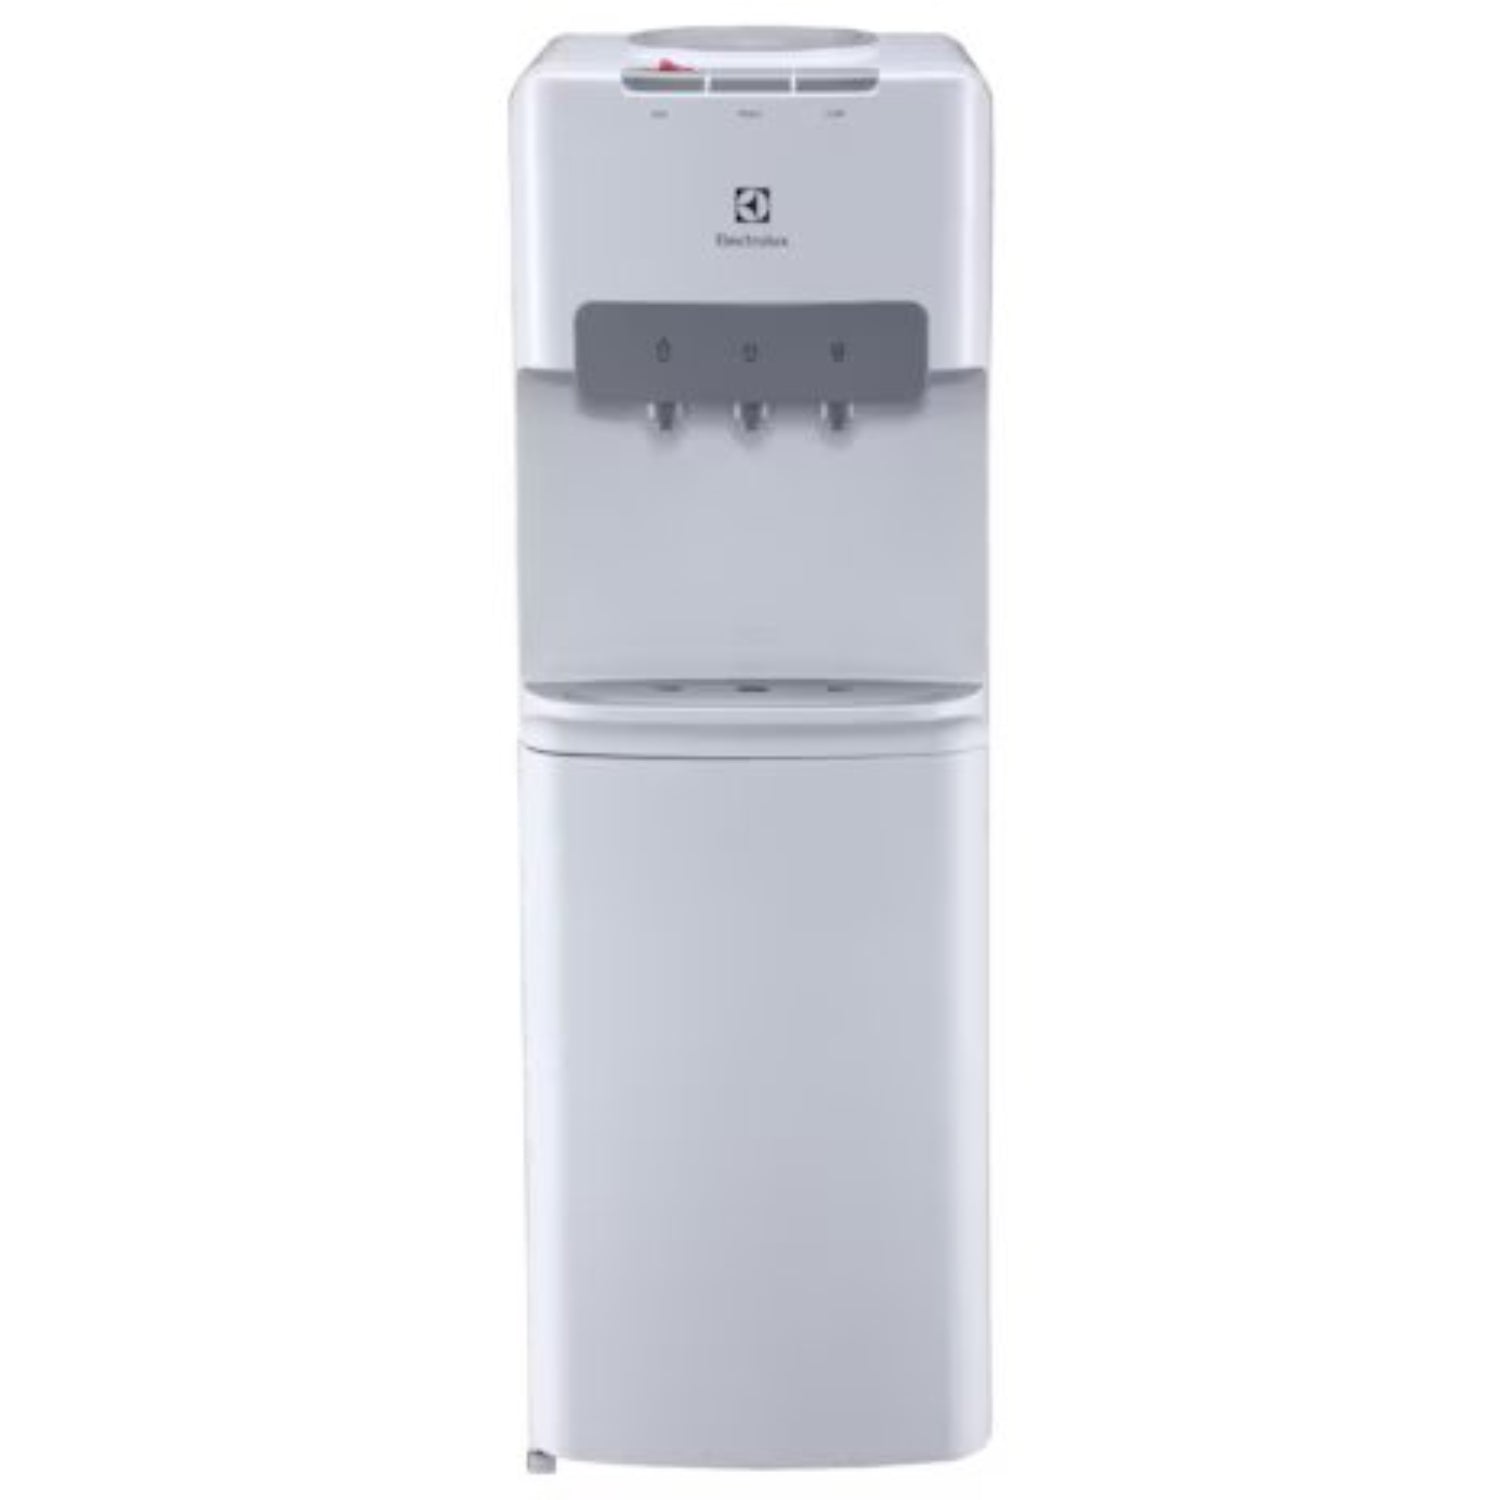 Electrolux Water Dispenser, Top Loading with 3 Water Spouts for Hot, Cold, and Neutral Temperatures, White